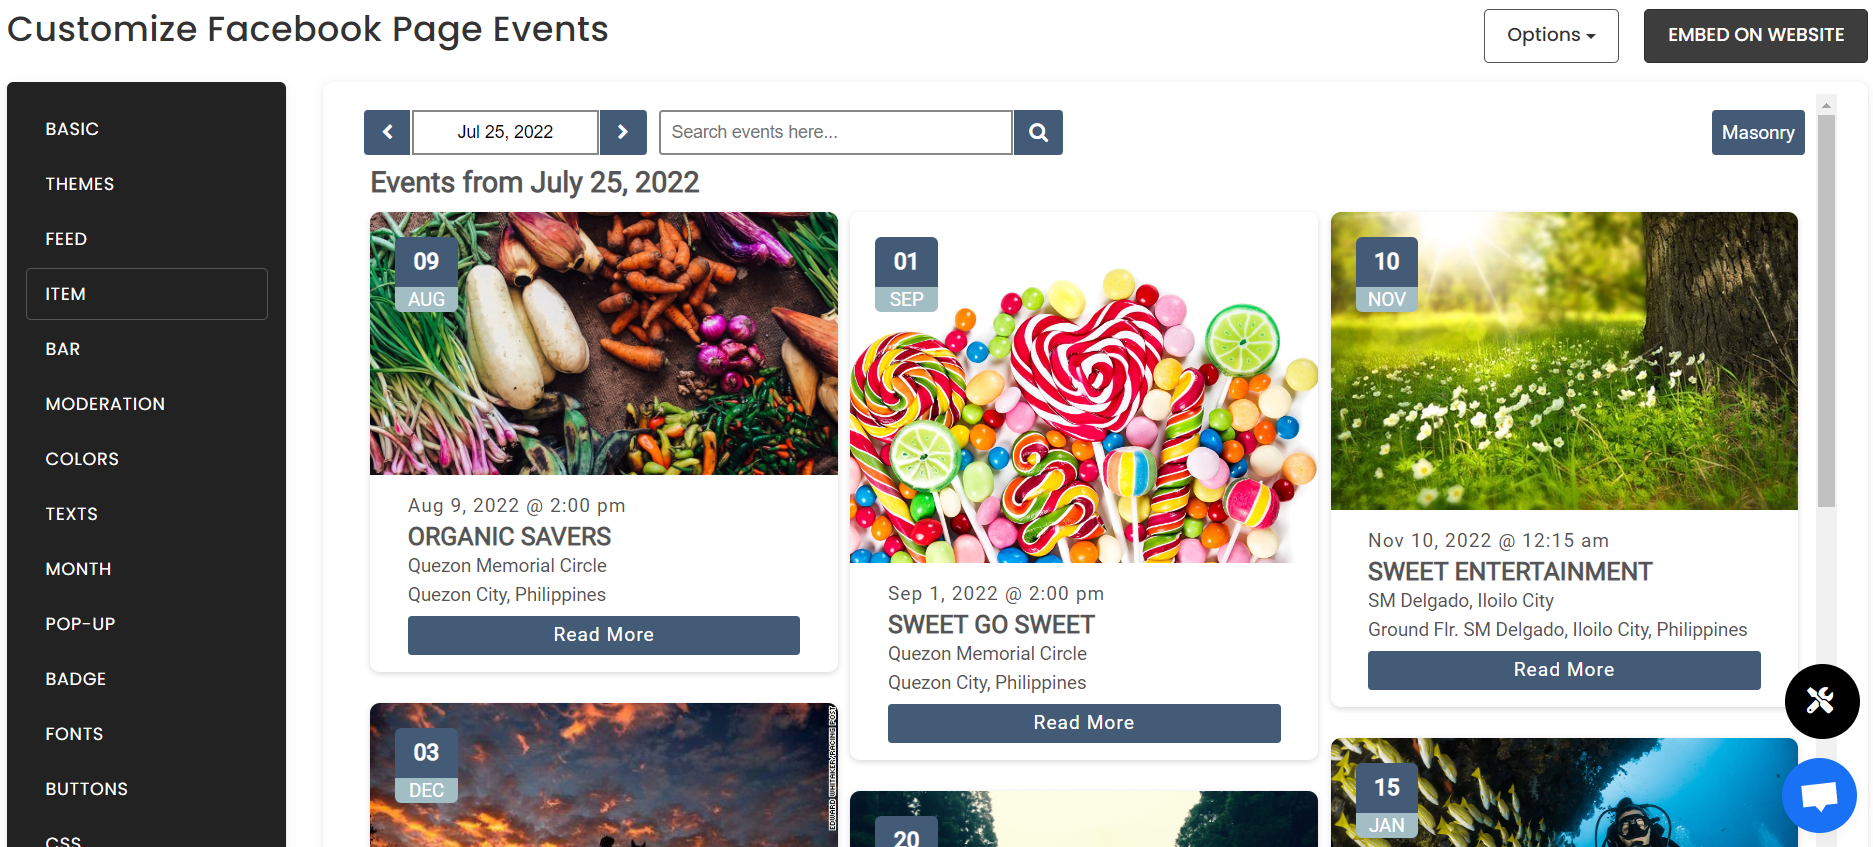 Customize your feed - Free Facebook Page Events Widget For Squarespace Website